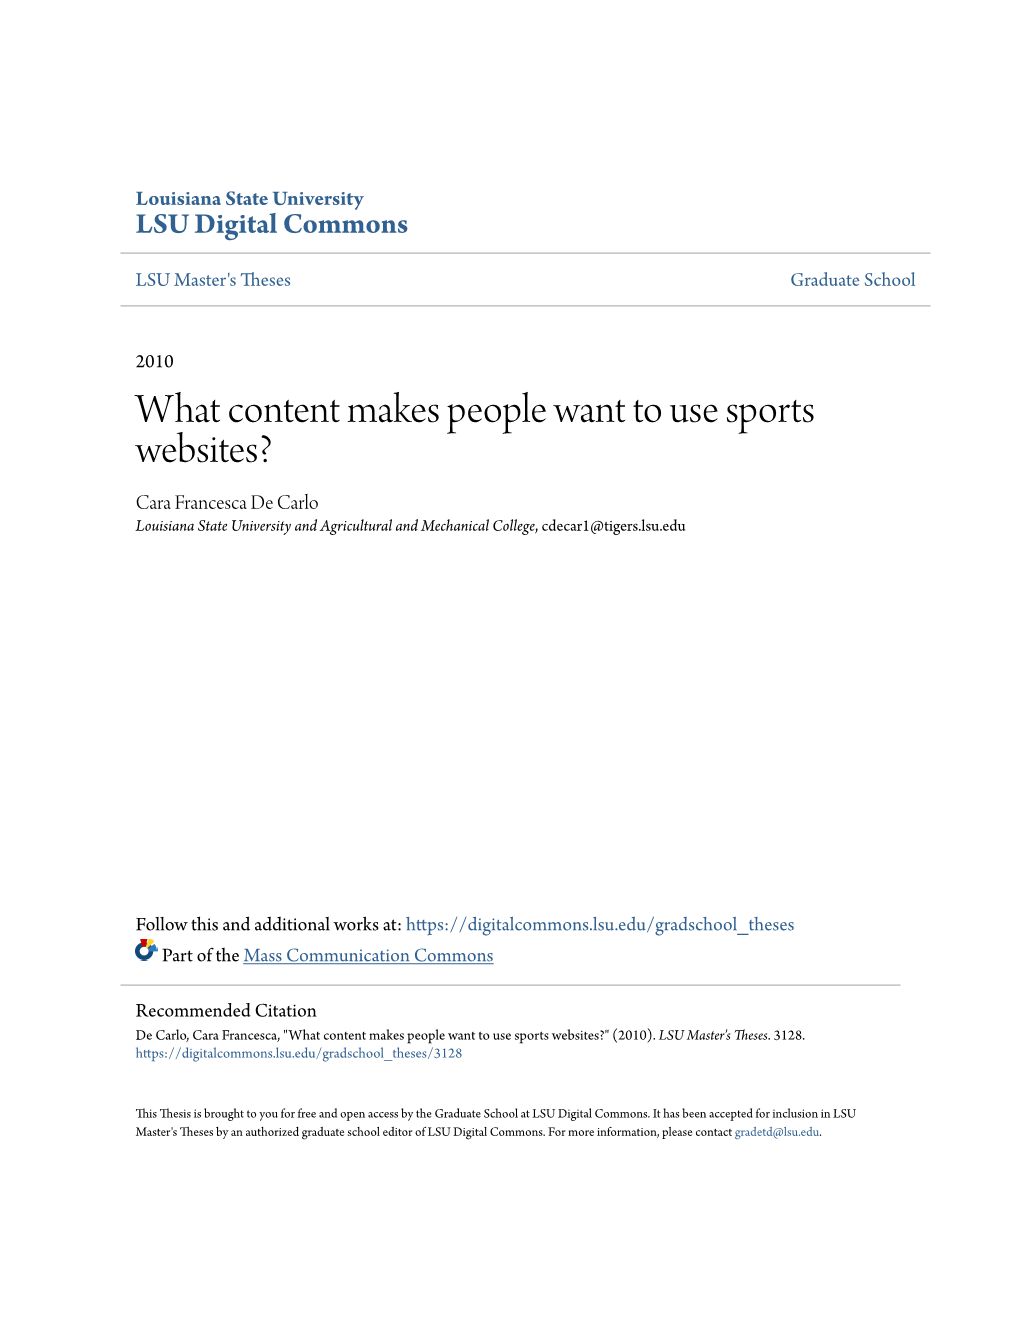 What Content Makes People Want to Use Sports Websites?